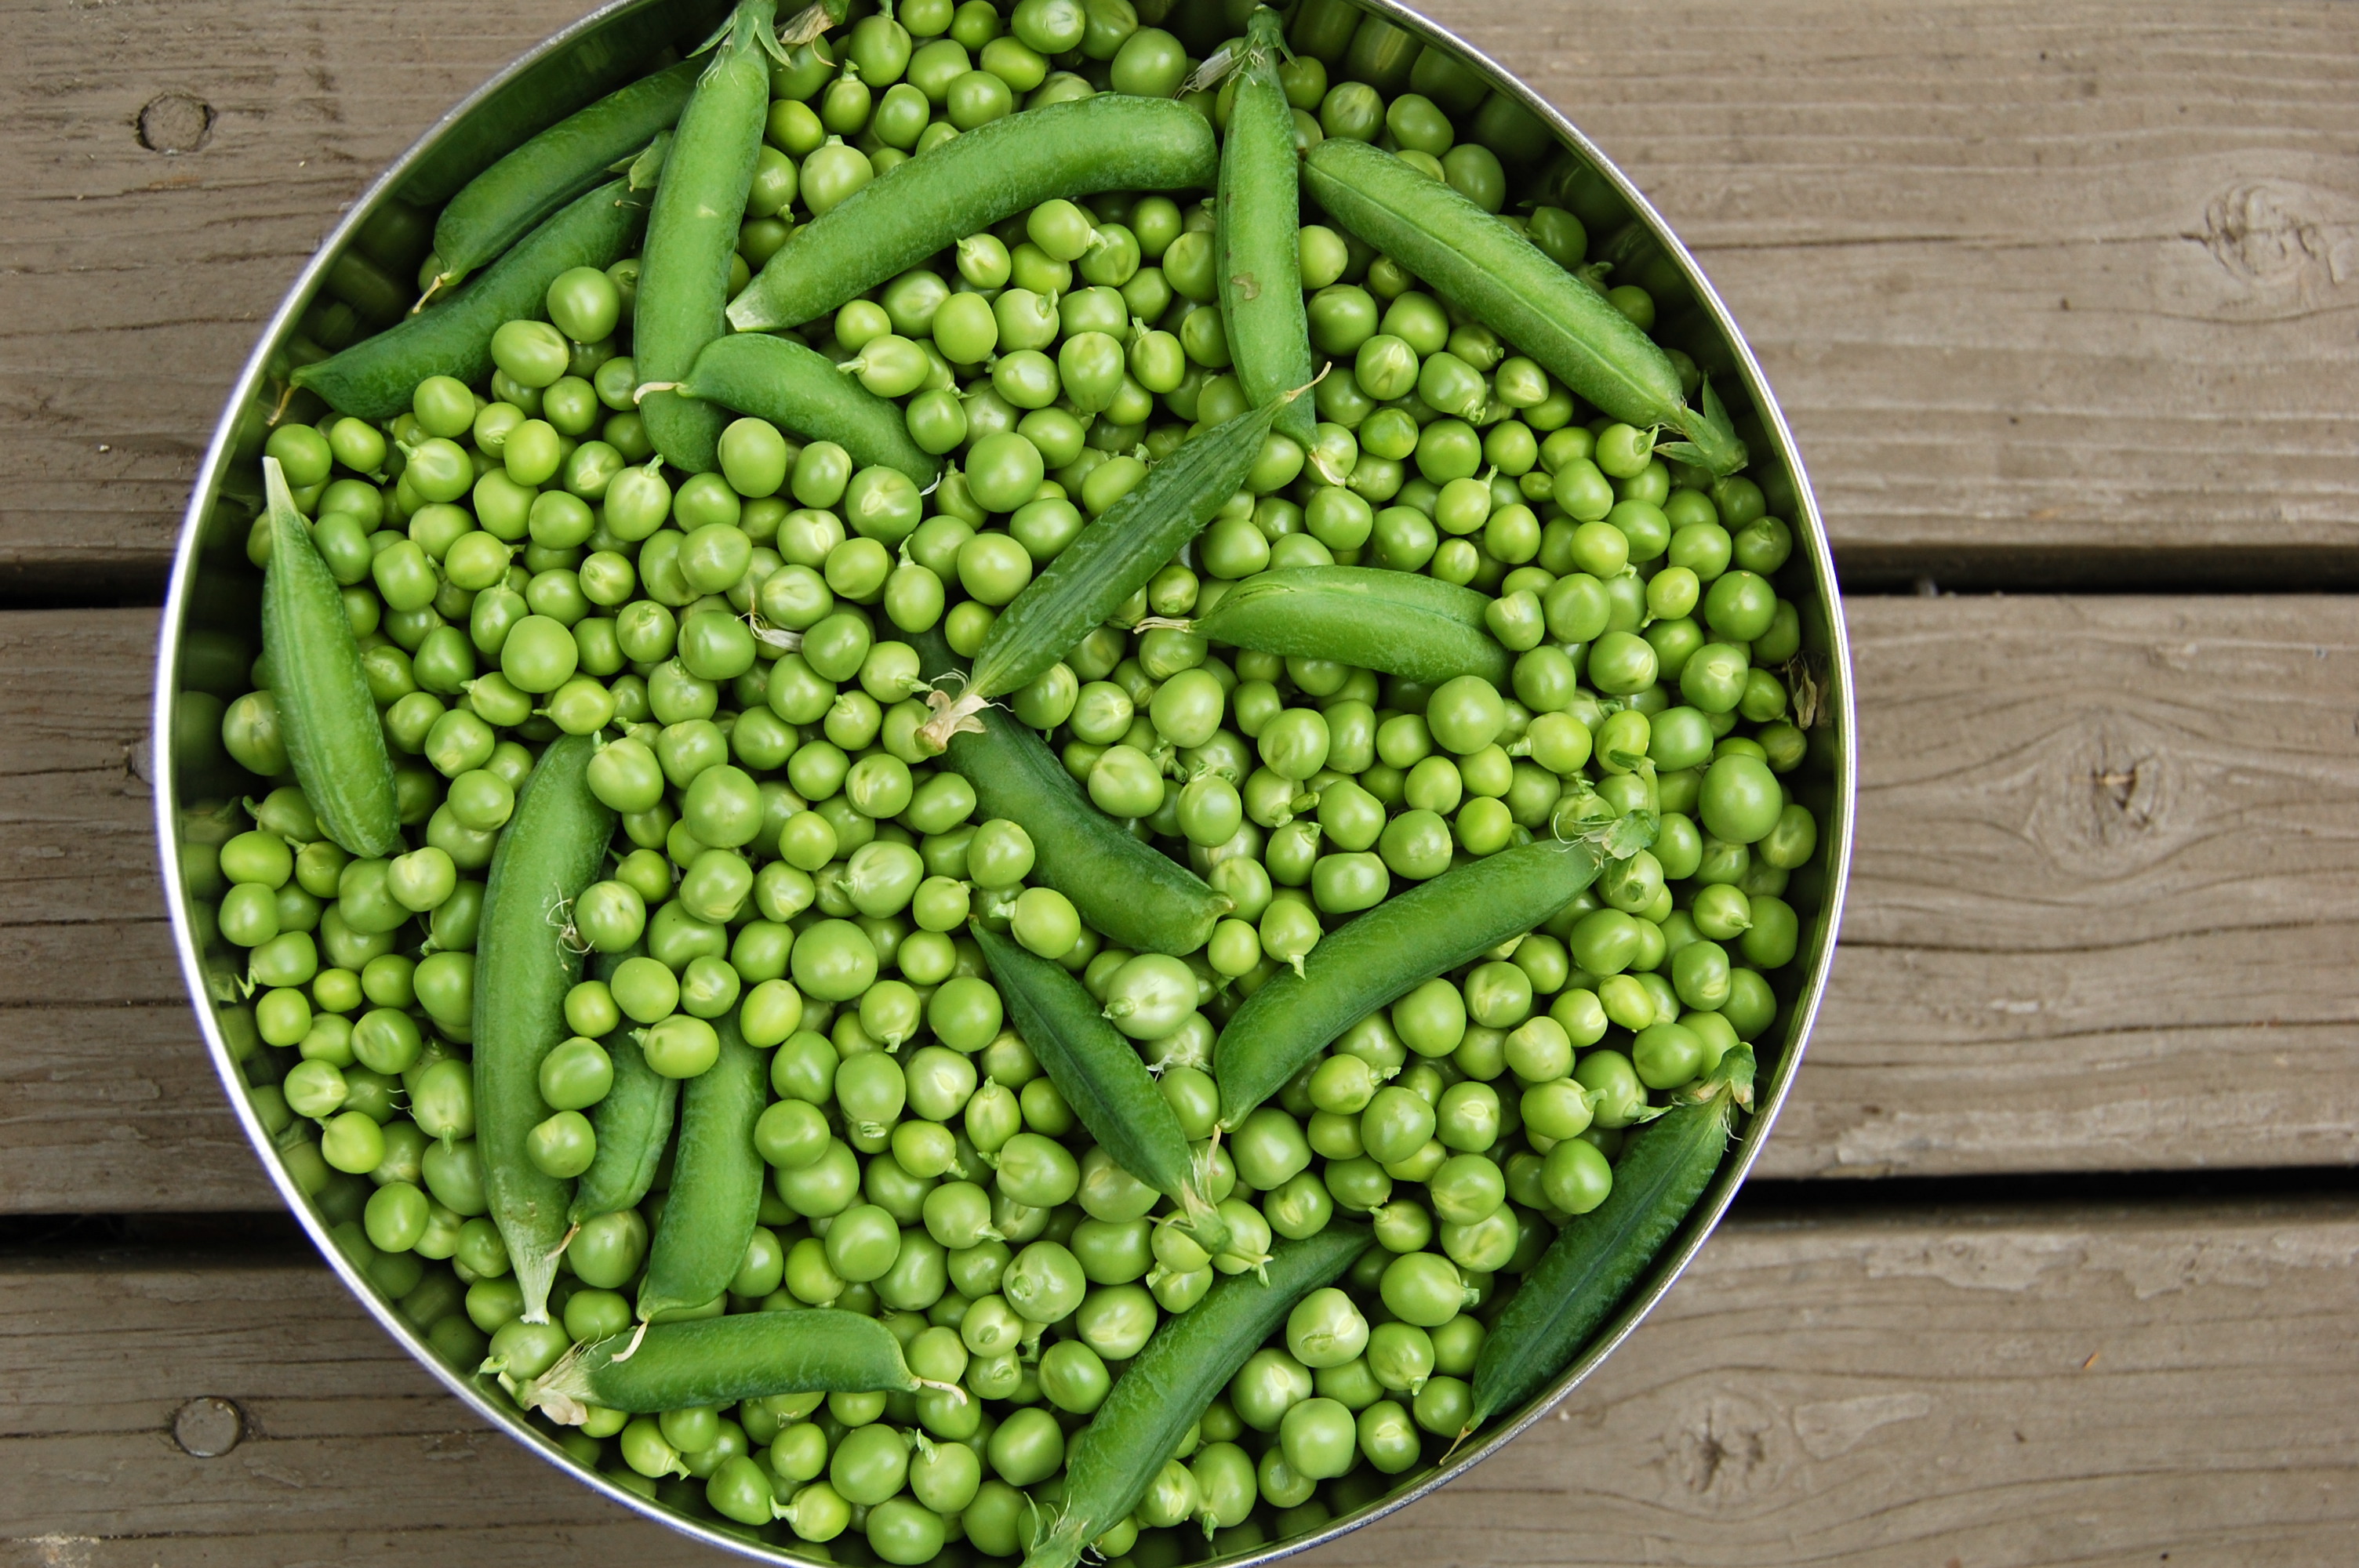 ... is great since we have them coming out of our ears now), English peas